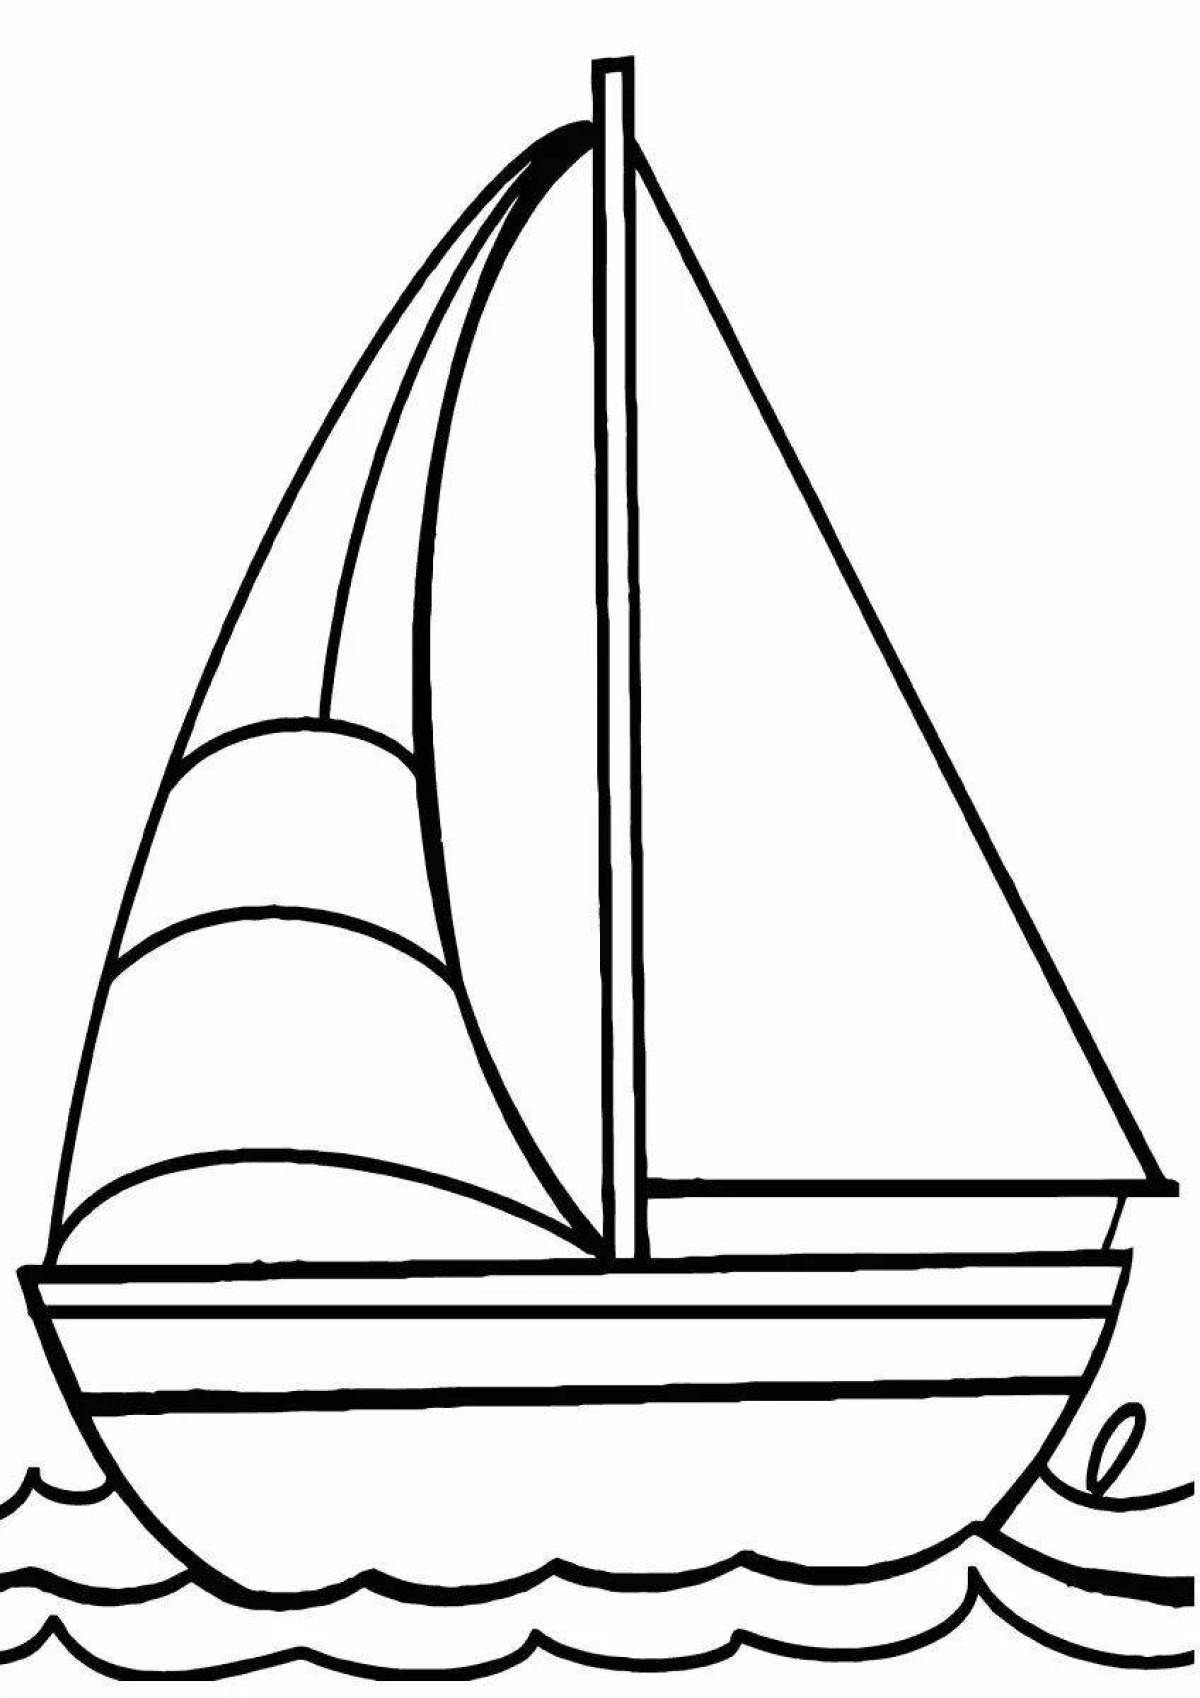 Coloring page happy sailboat for kids